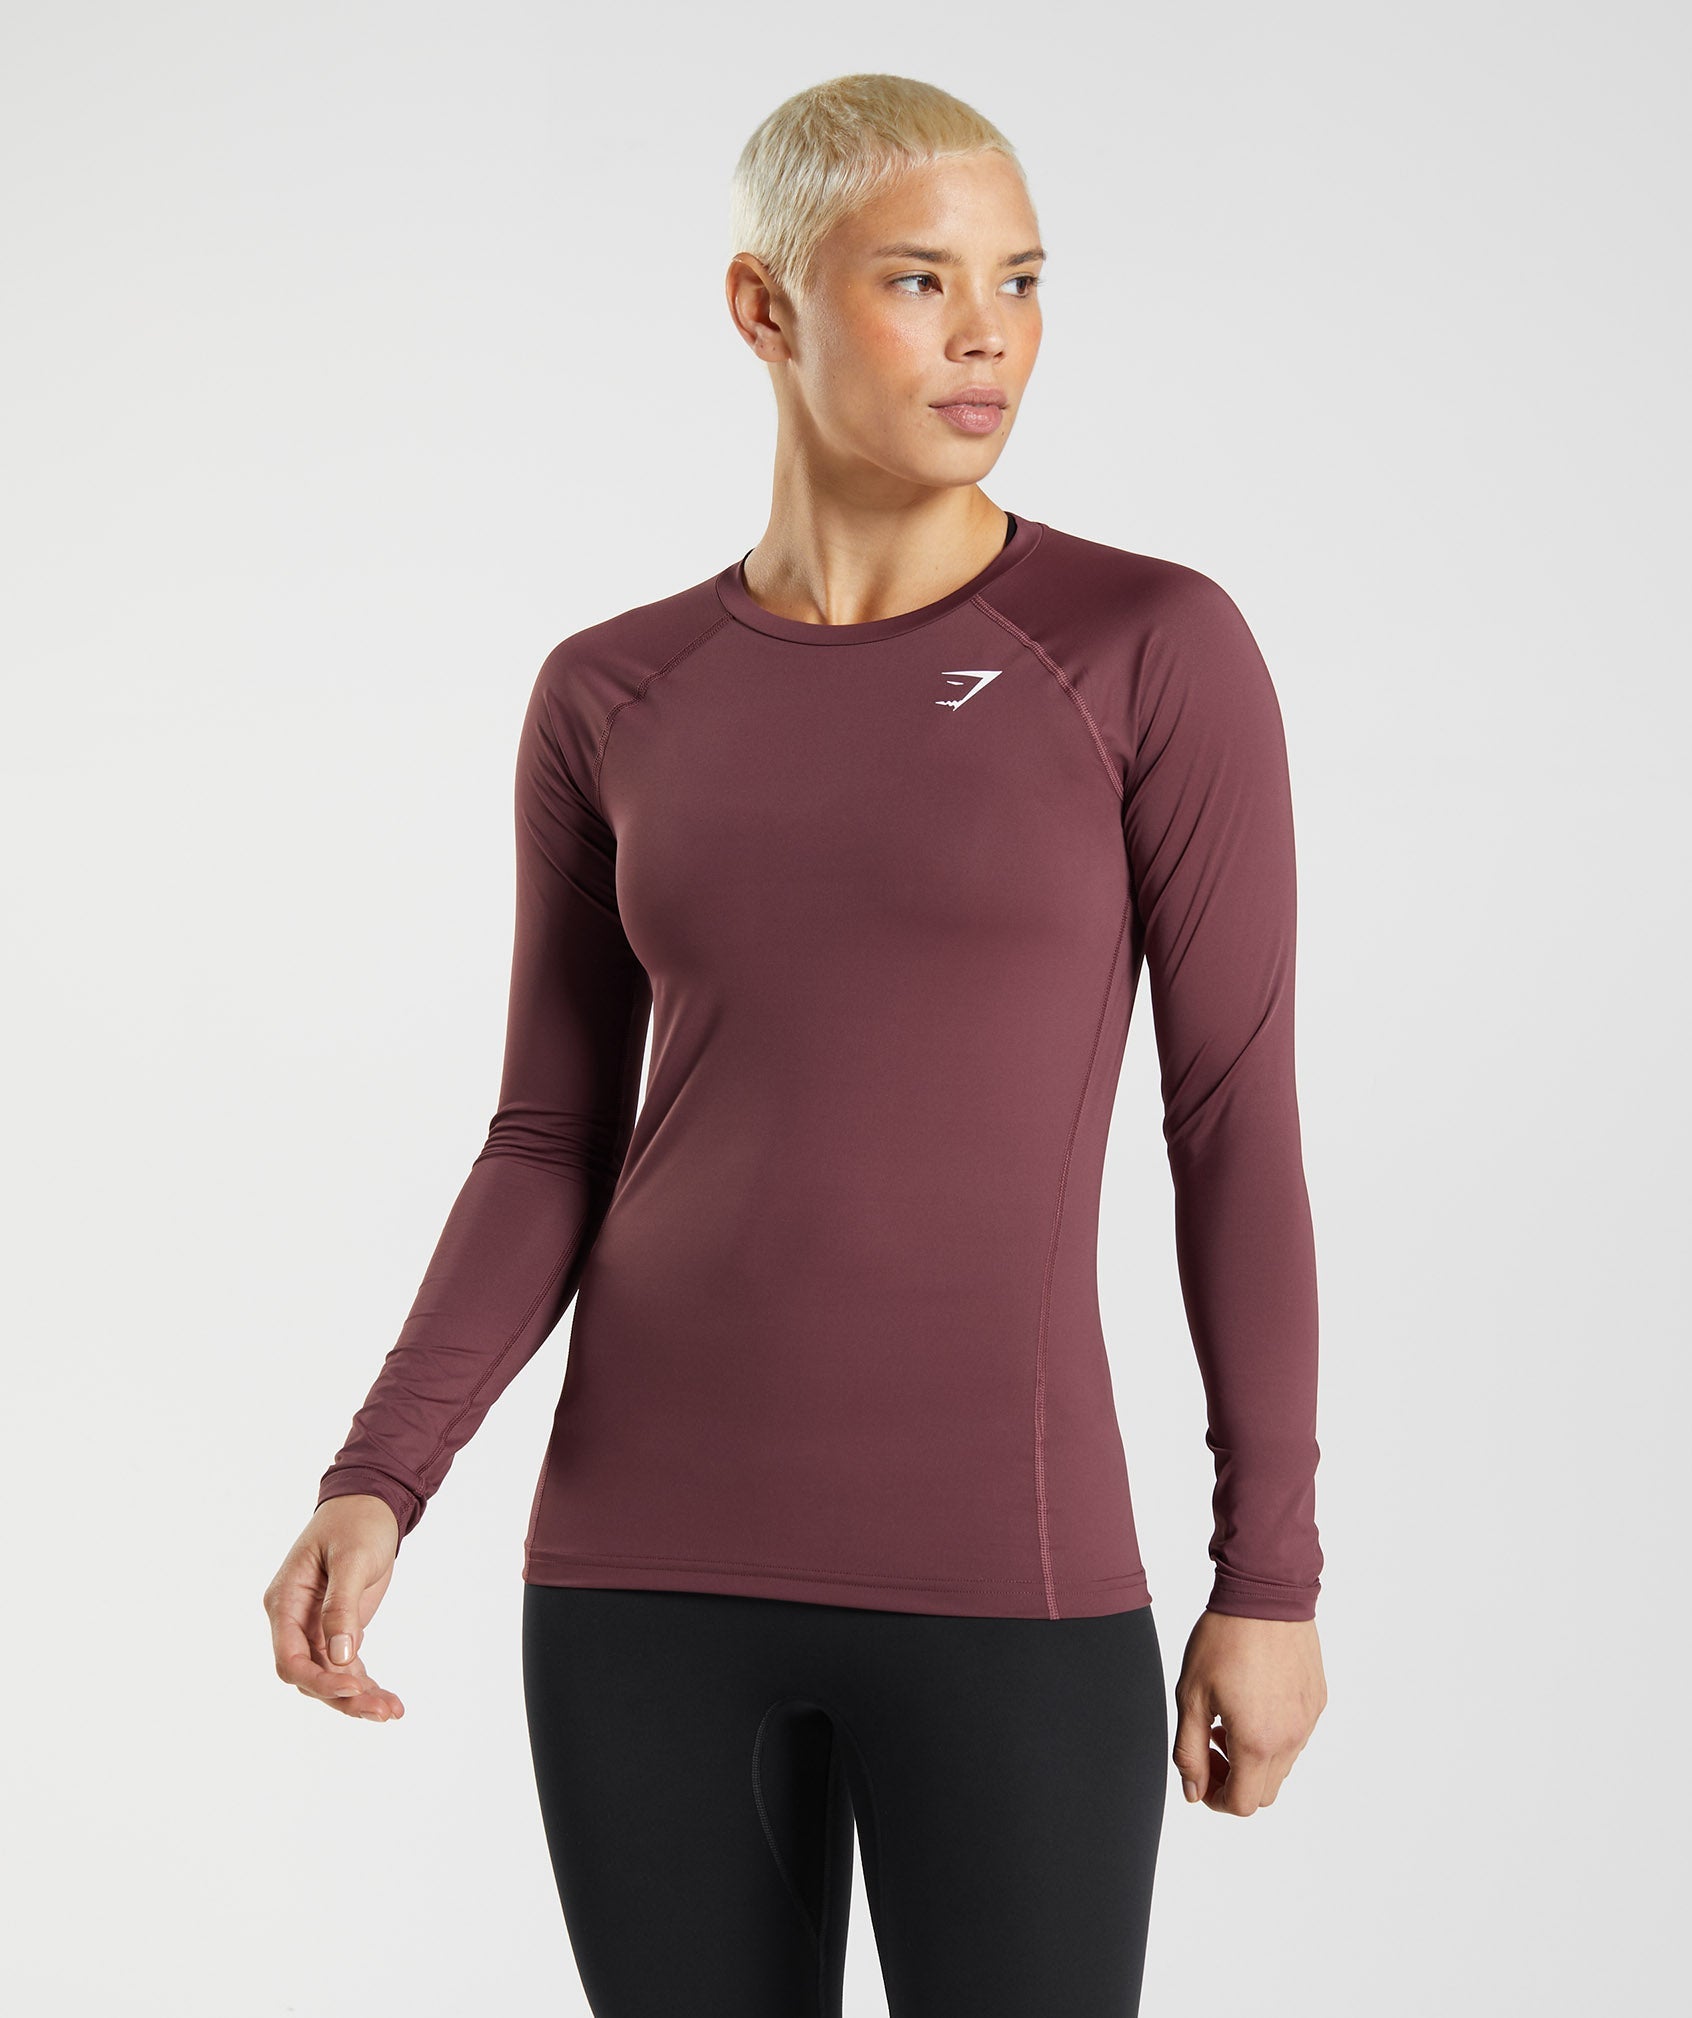 Training Baselayer Long Sleeve Top in {{variantColor} is out of stock